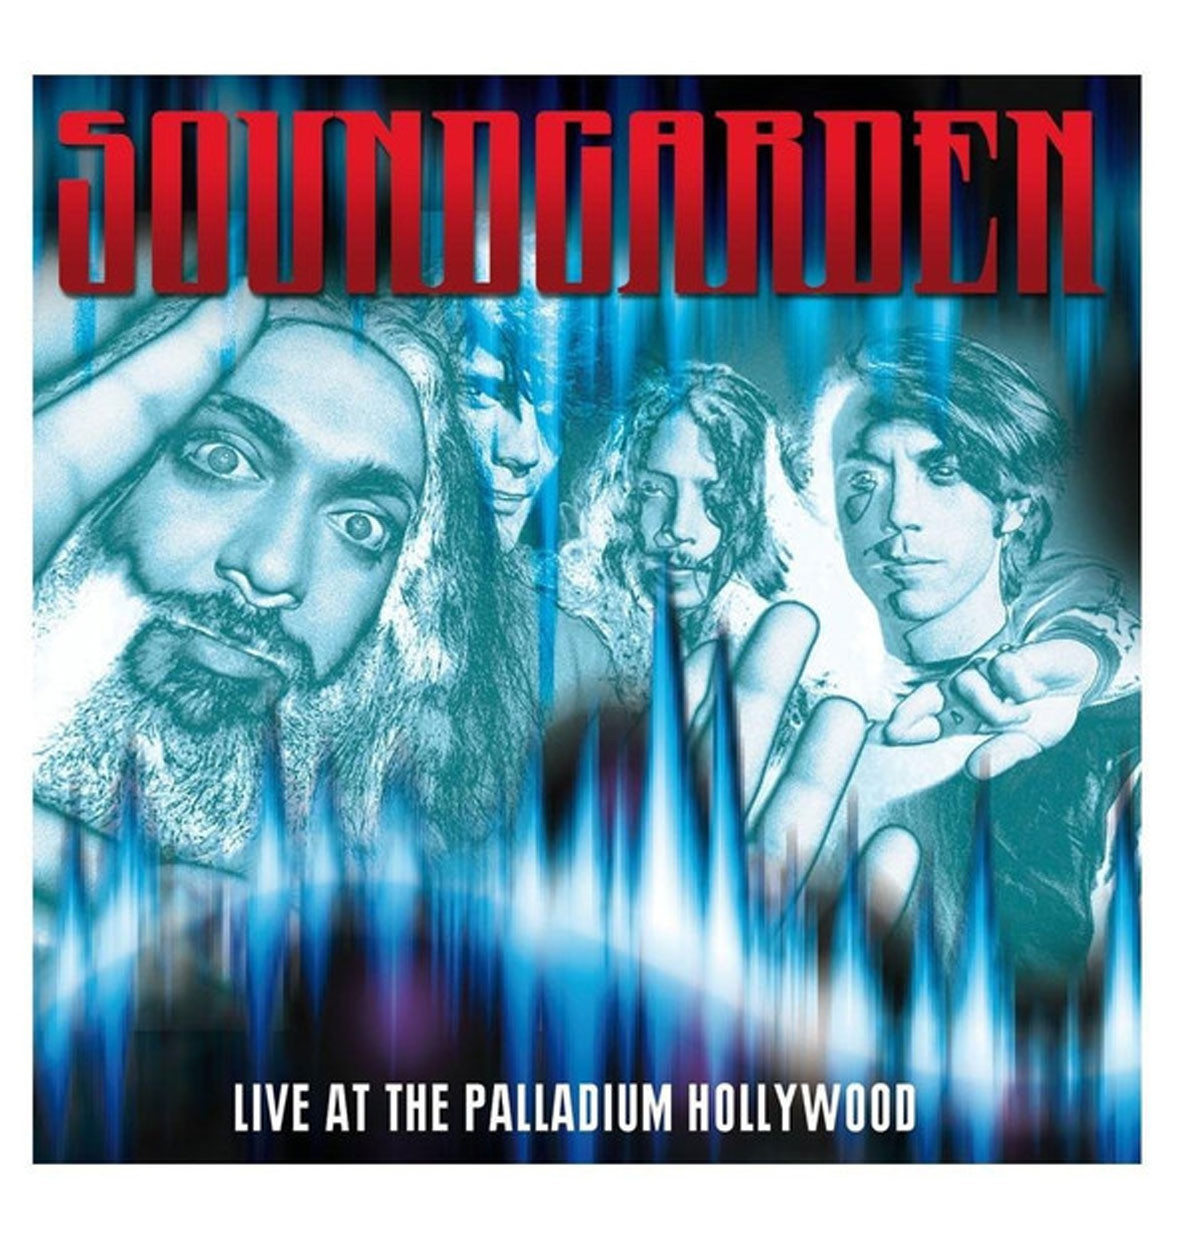 Soundgarden - Live At The Palladium Hollywood Limited Edition LP